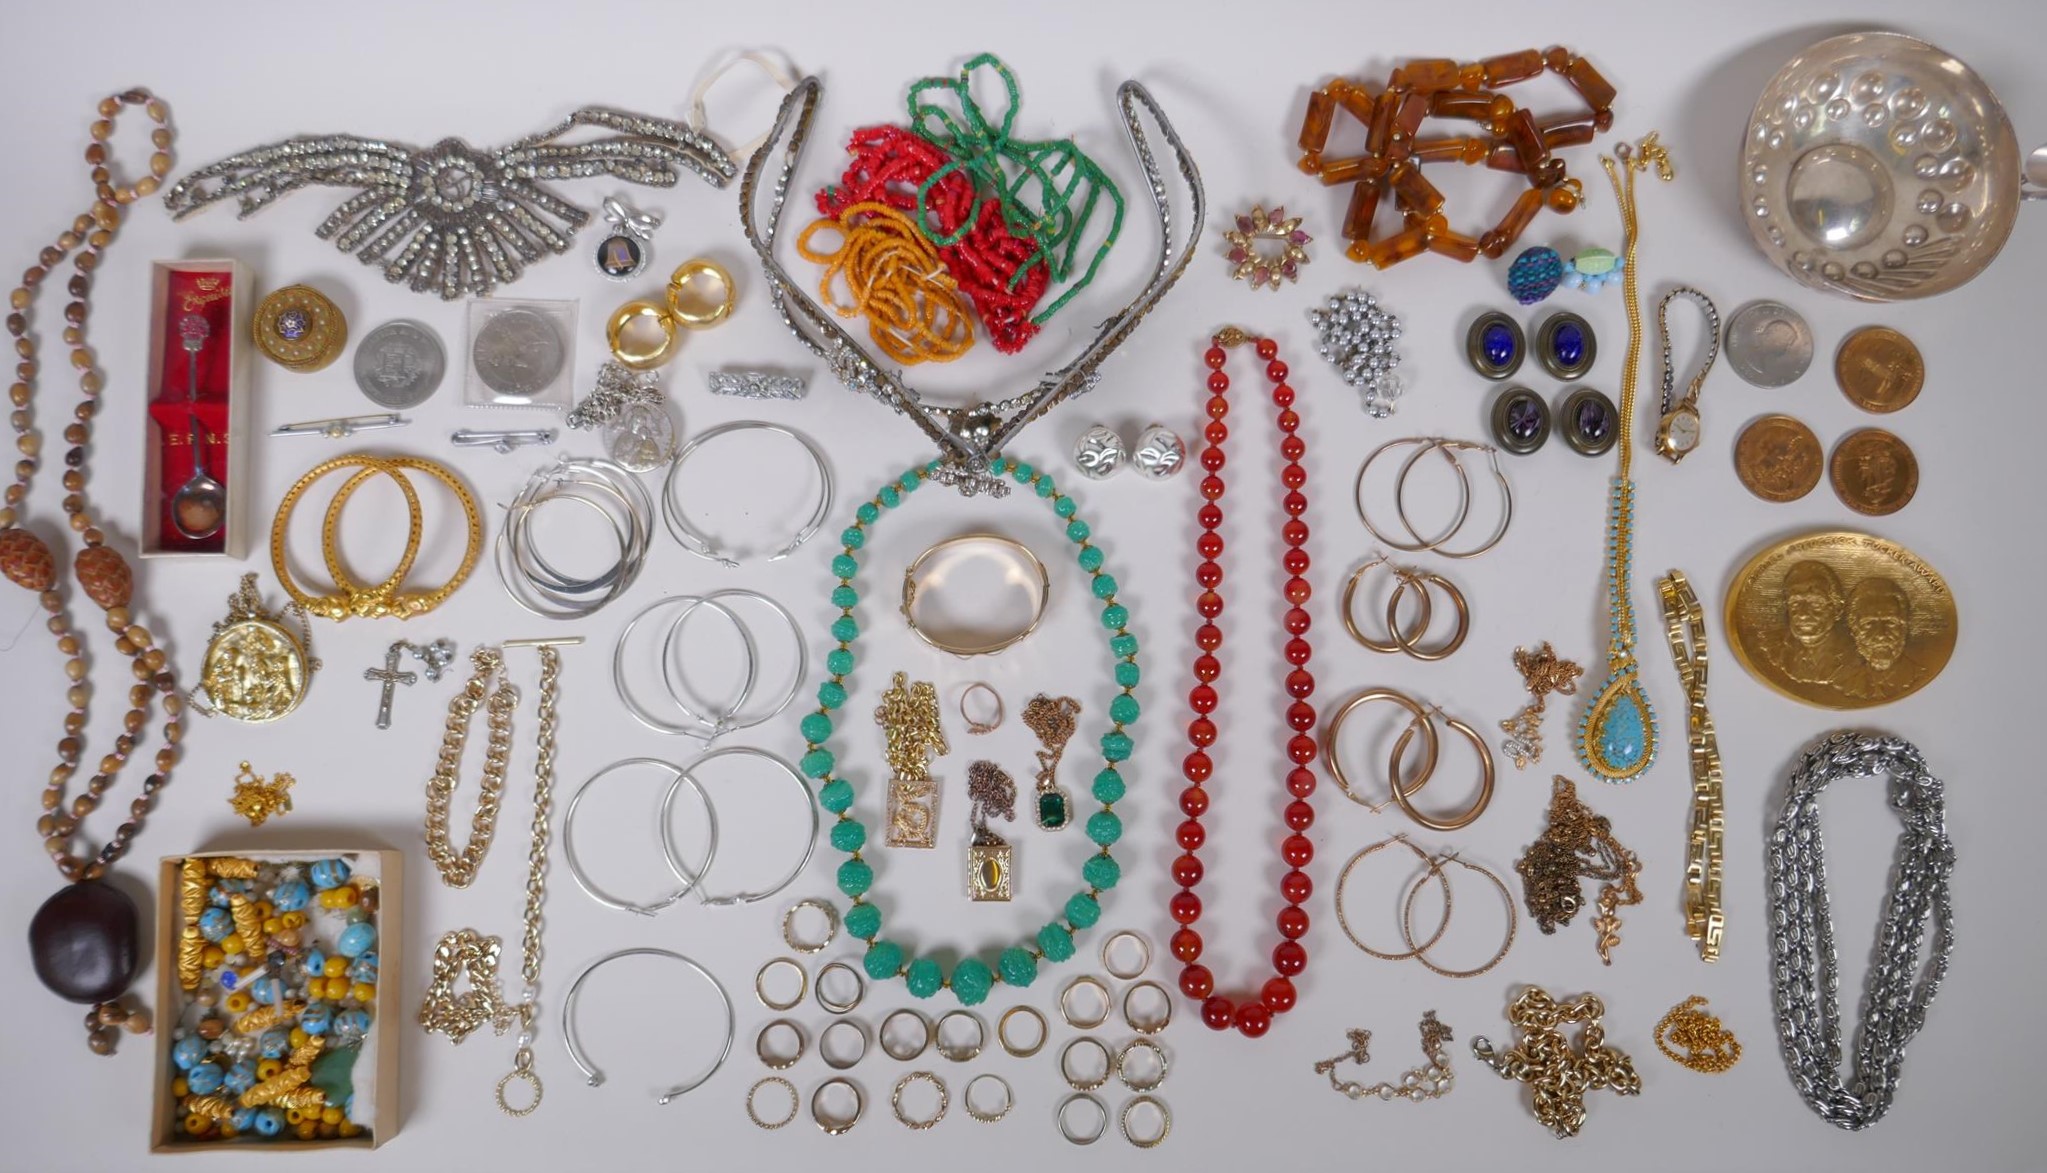 A quantity of vintage costume jewellery including a tiara, bangles, necklaces etc, together with a